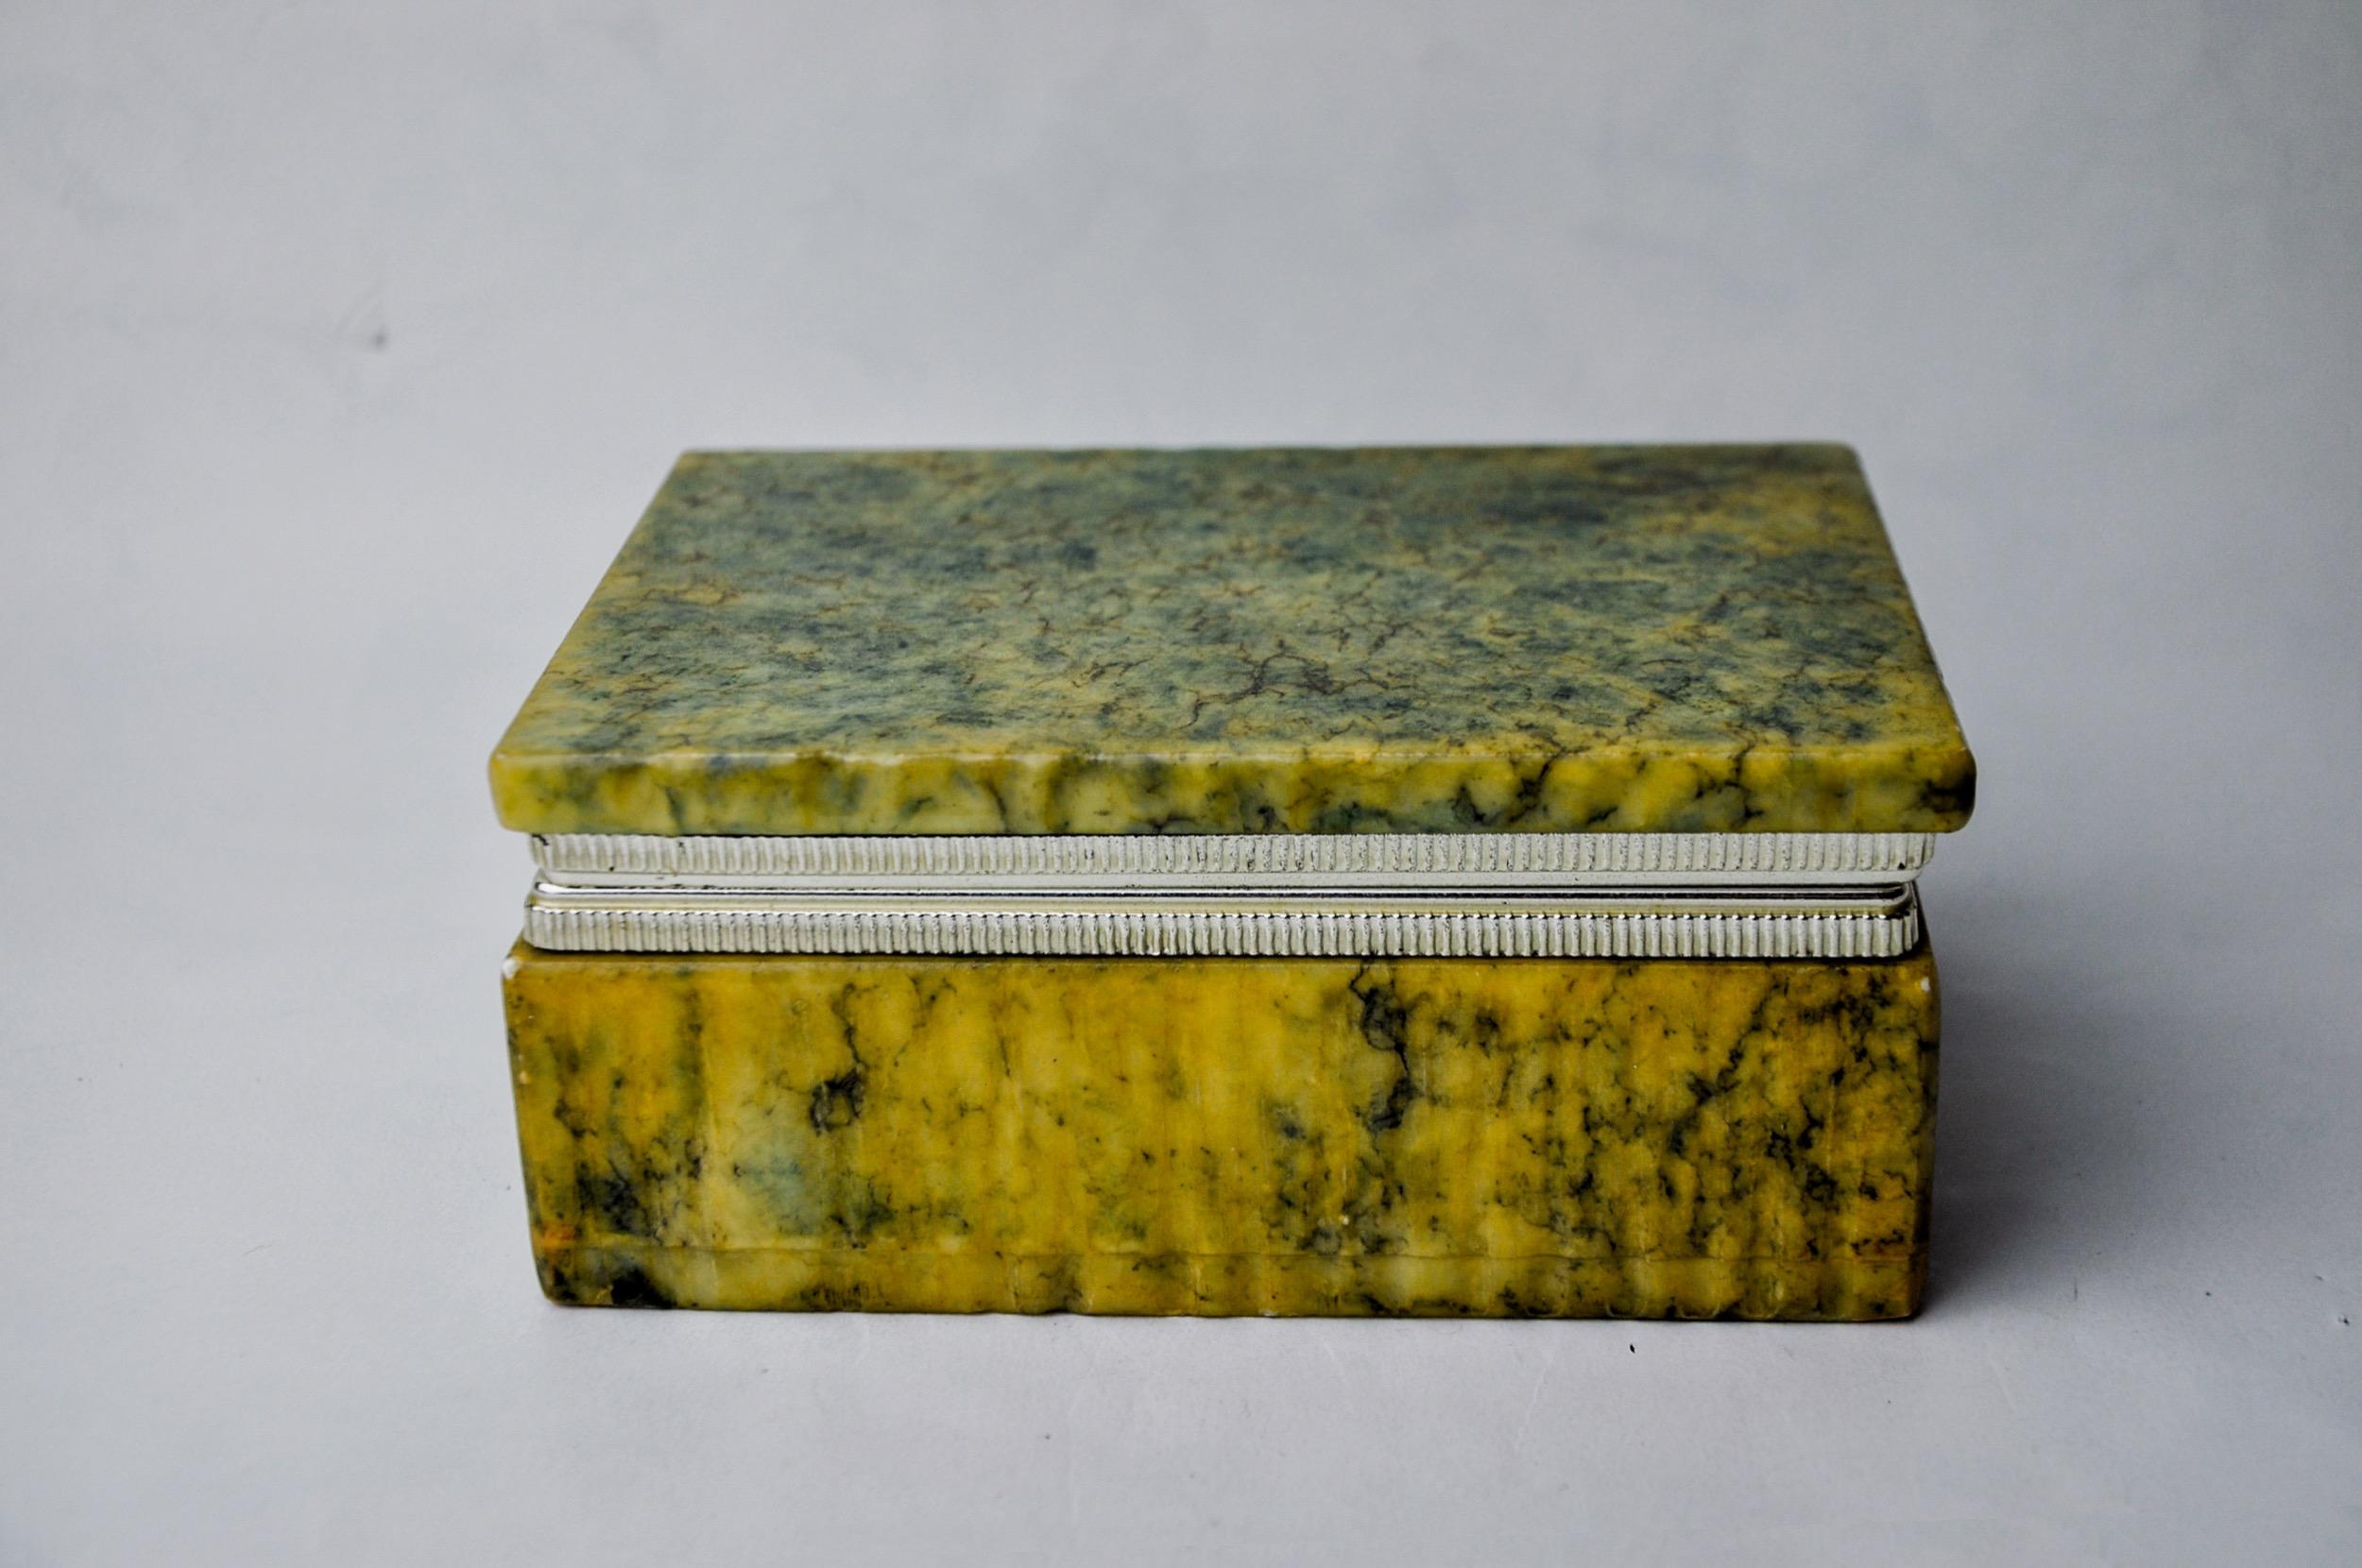 Hollywood Regency Yellow and blue alabaster box by Romano Bianchi, Italy, 1970